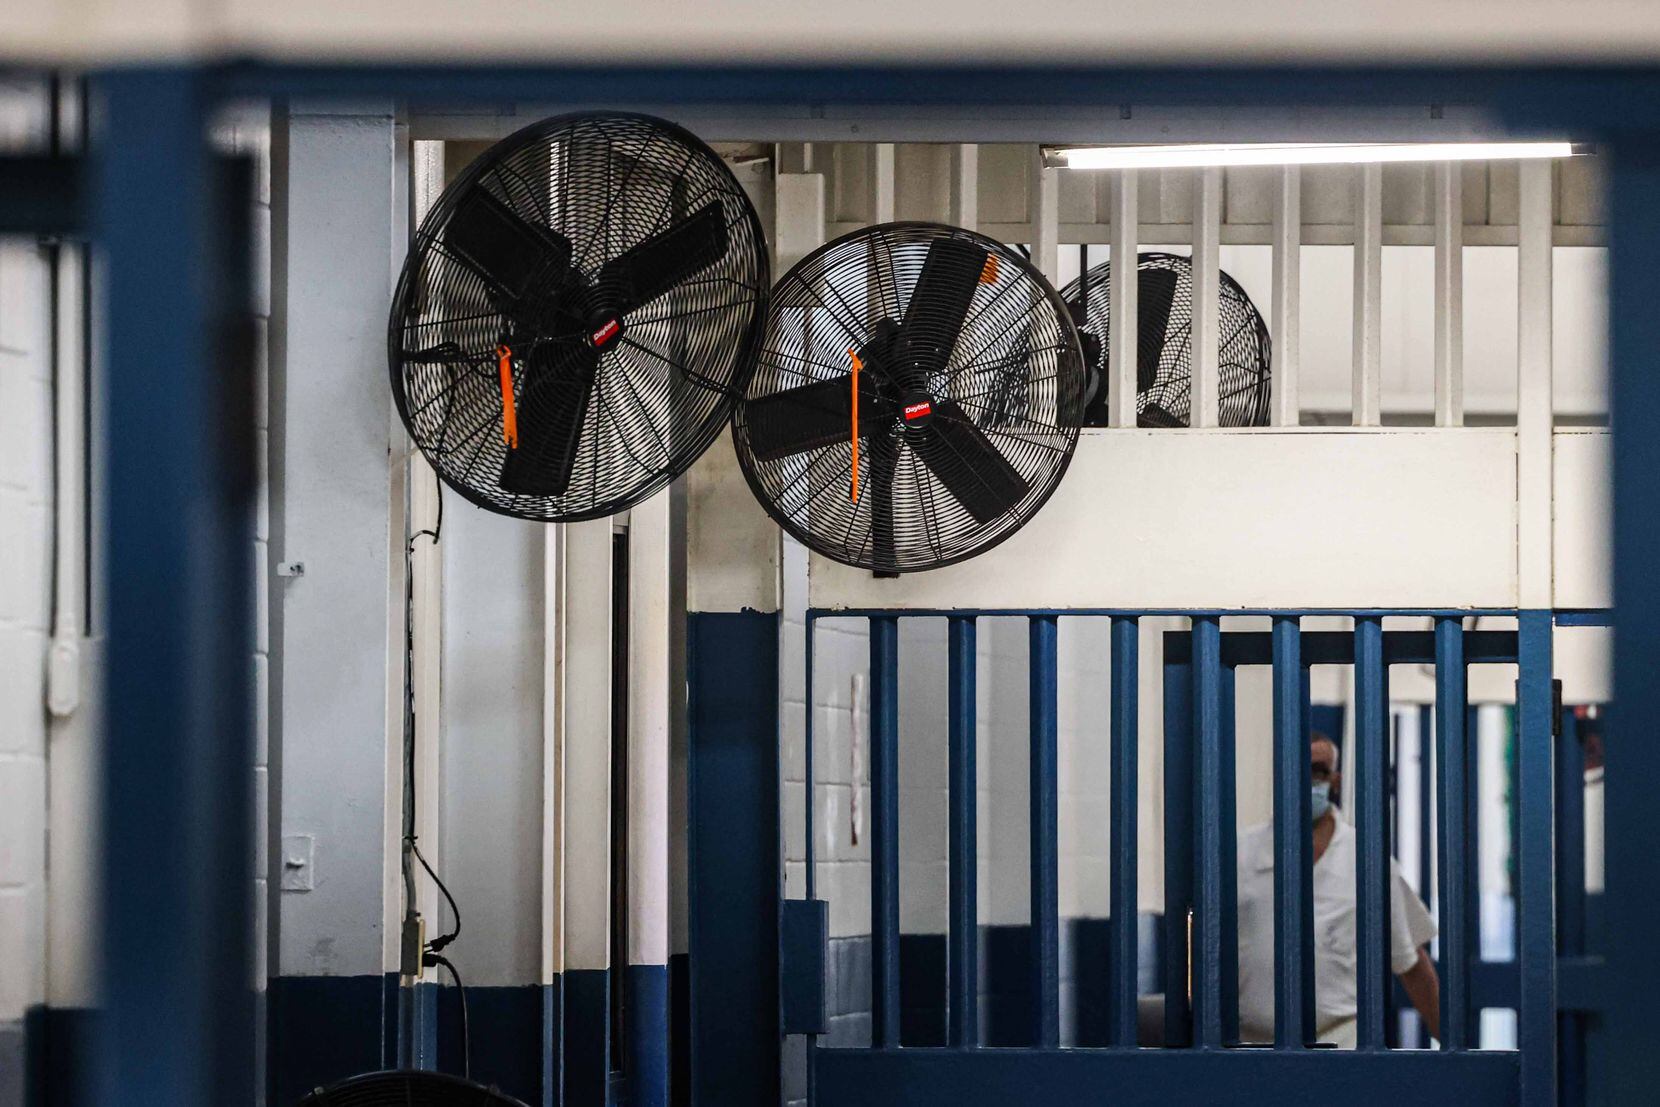 In 2021 file photo, fans hang in a hall's corner at Louie C. Powledge Unit in Palestine, Texas.